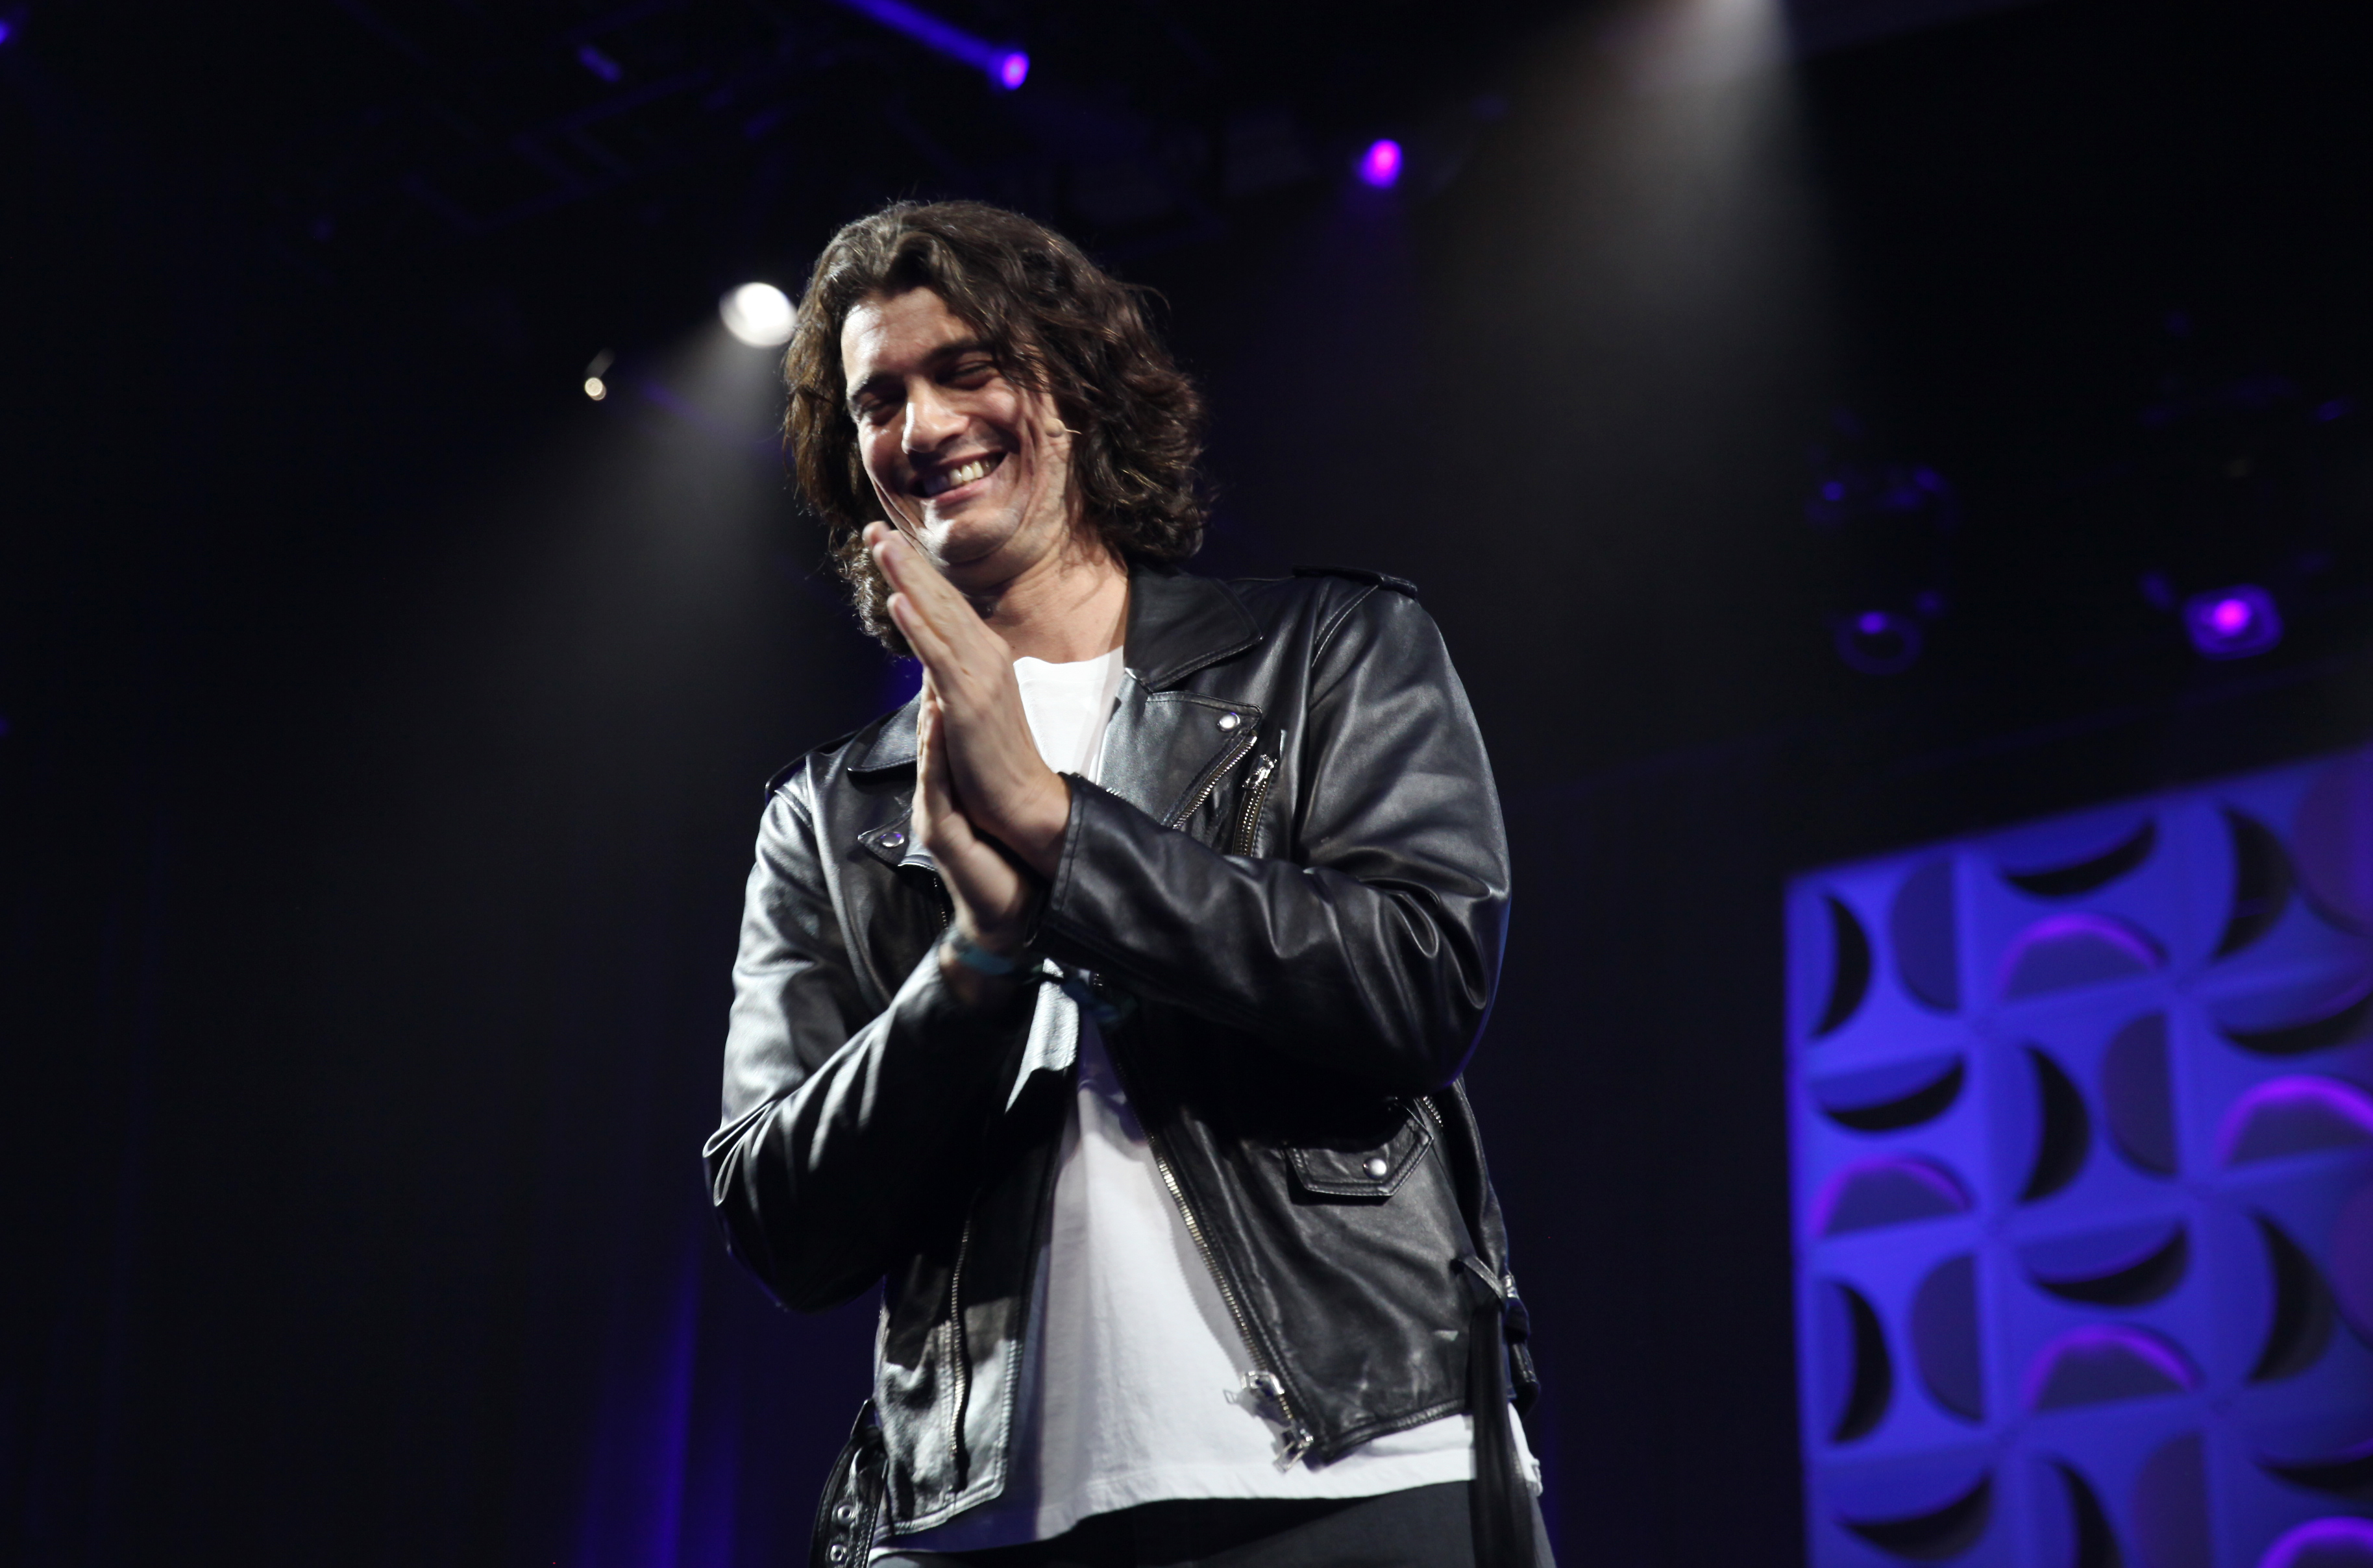 WeWork’s ex-CEO Adam Neumann clasps his hands and smiles at the audience from onstage.